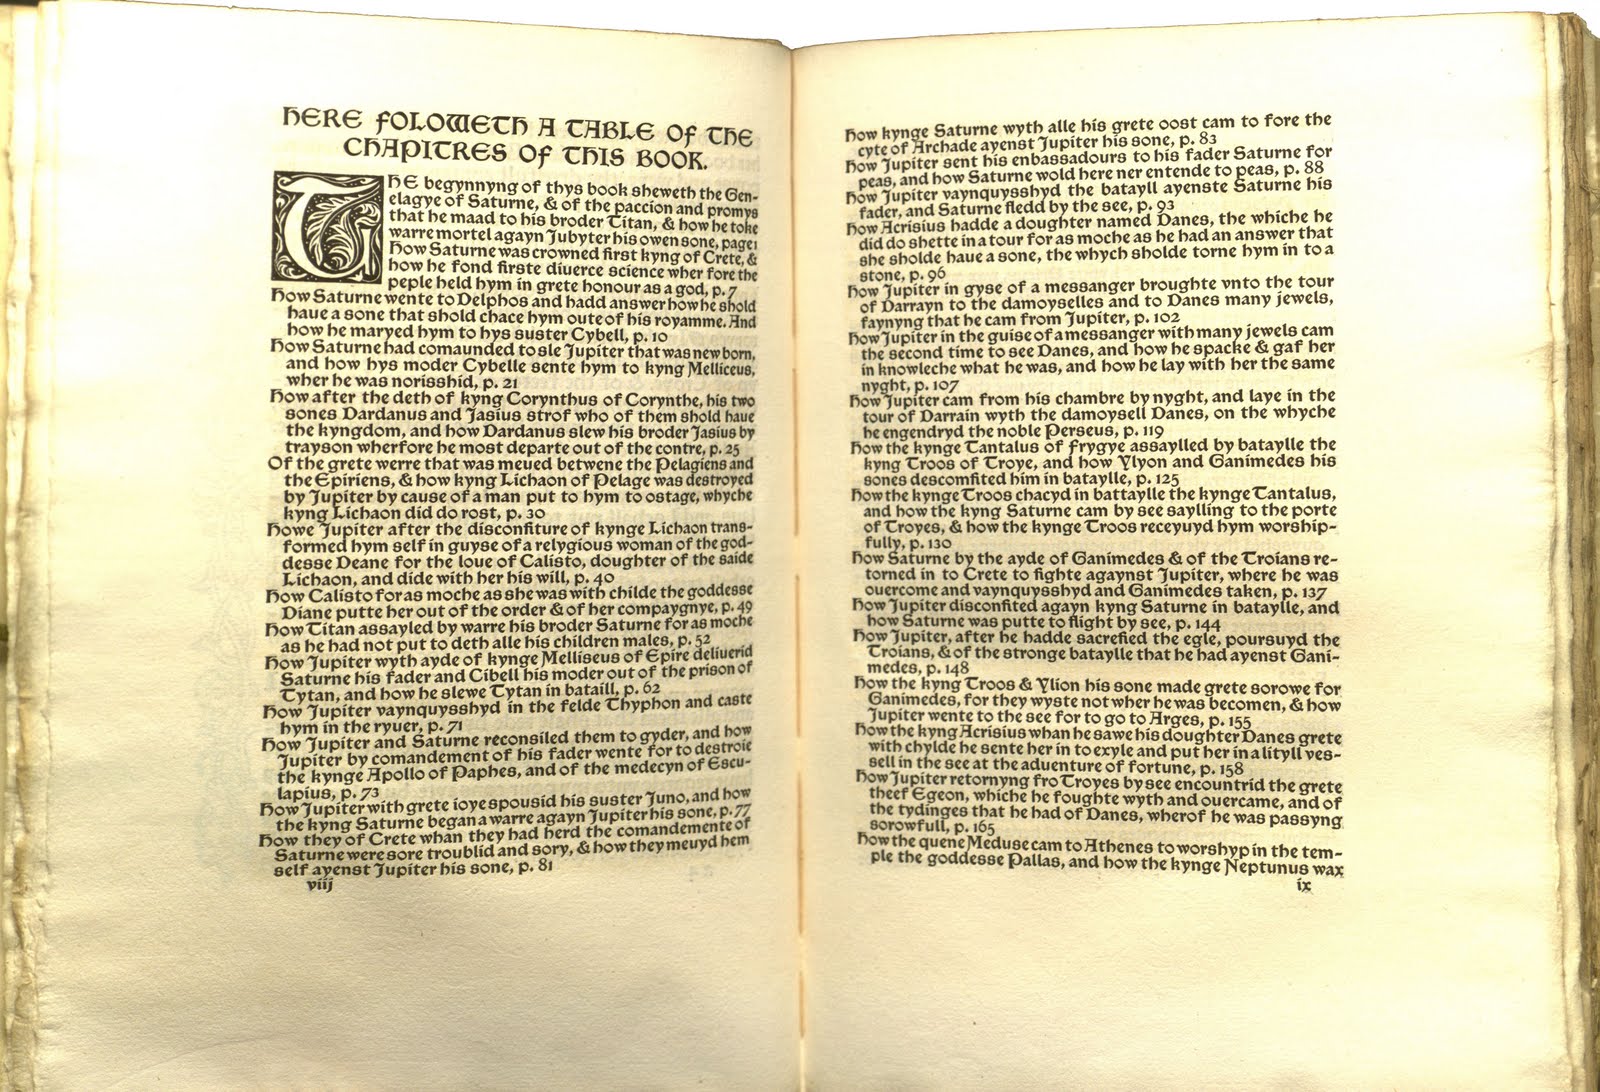 A two-page spread with initial caps listing the chapters in the book with this introductory text: Here followeth a table of the chapitres of this book